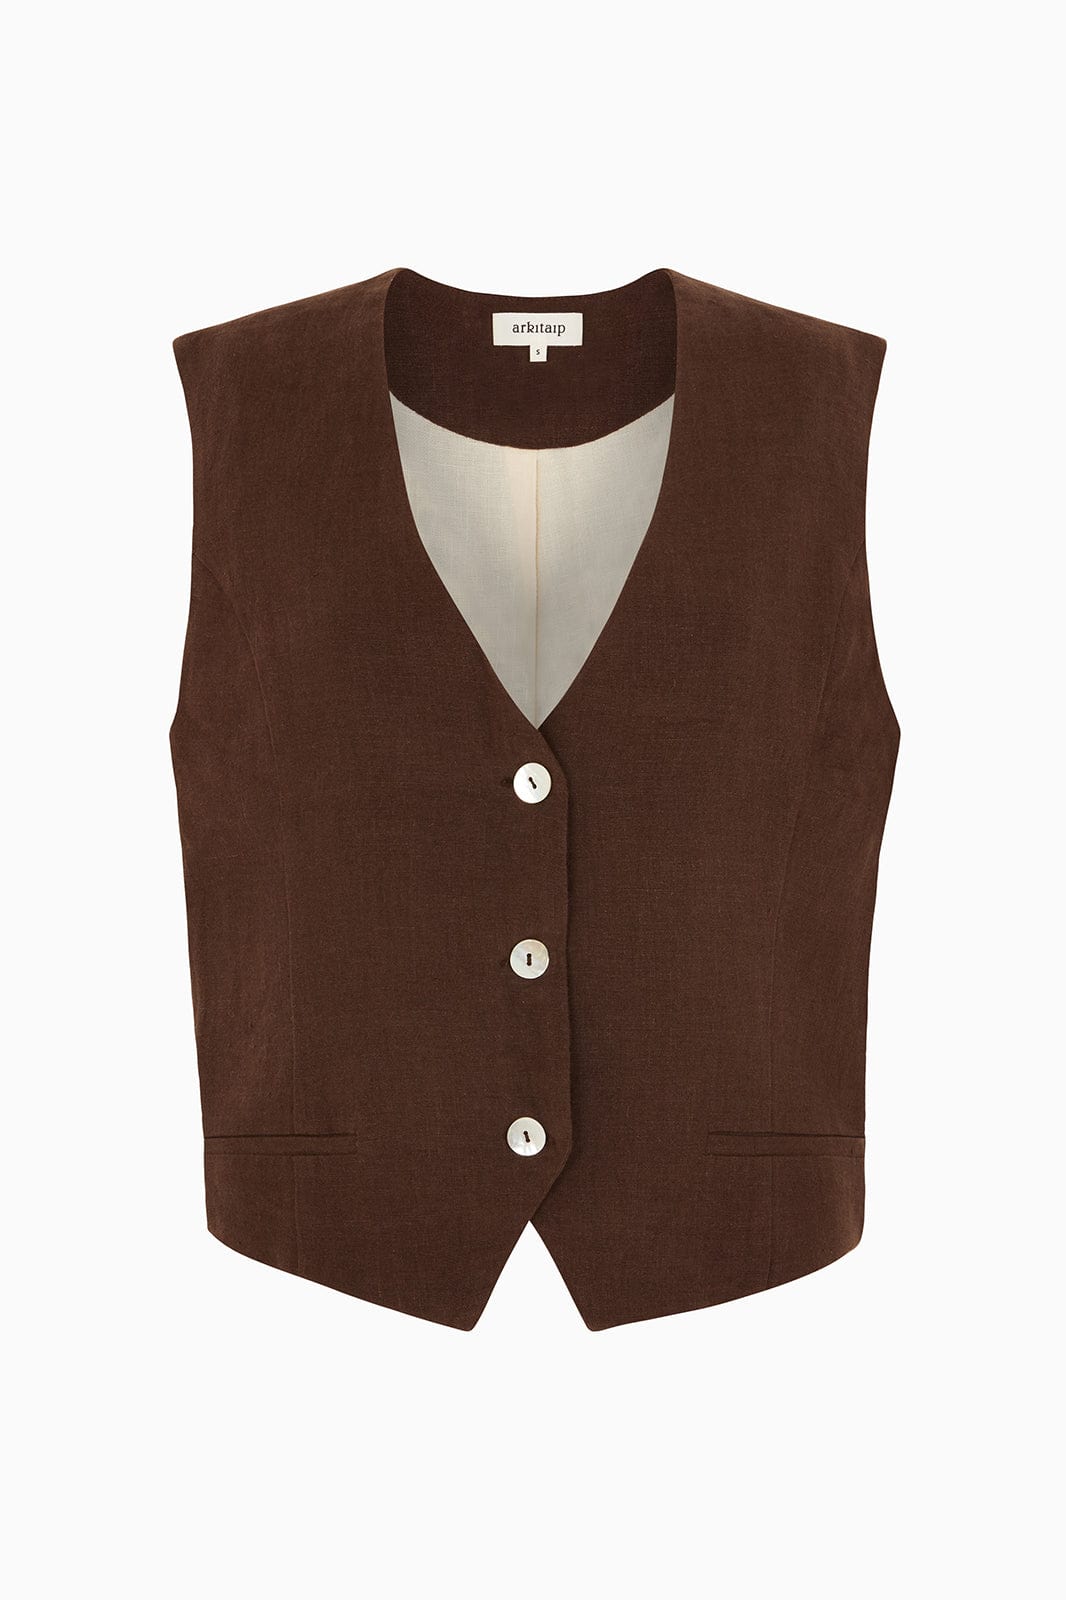 arkitaip The Bobby Linen Vest in chocolate - SAMPLE